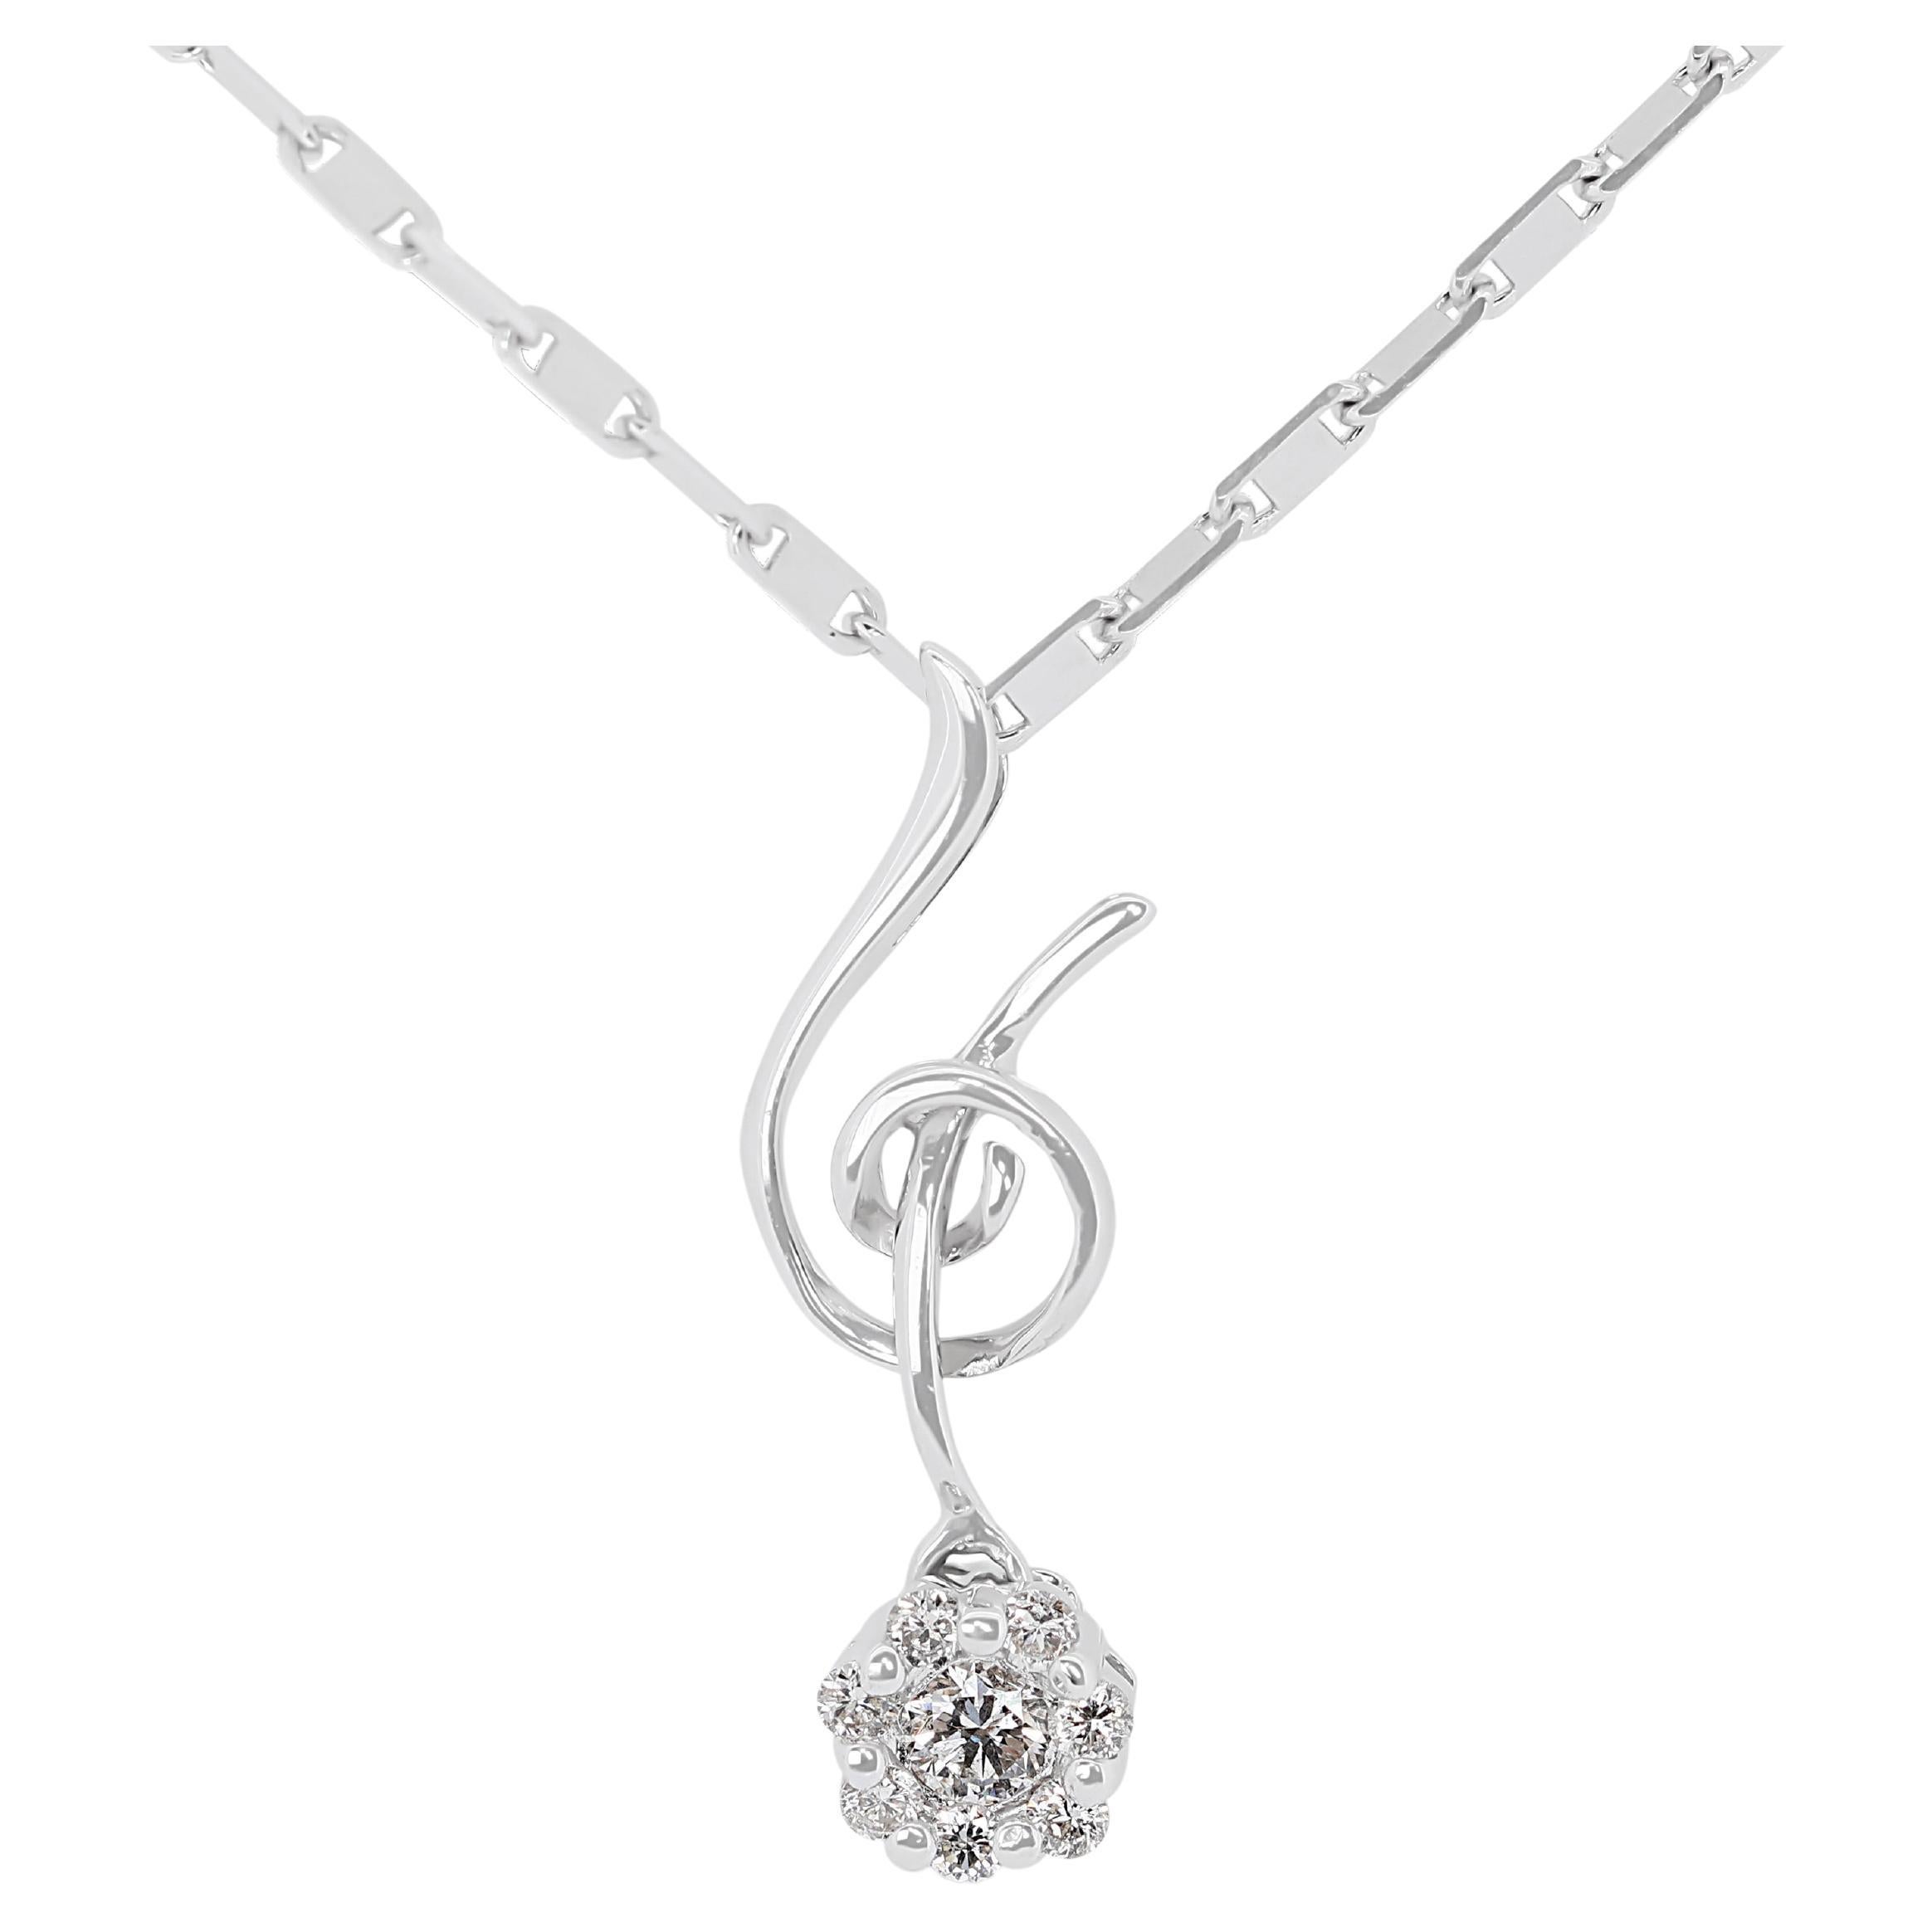 Stunning 0.16ct Diamonds Necklace in 18K White Gold - (Chain Included)